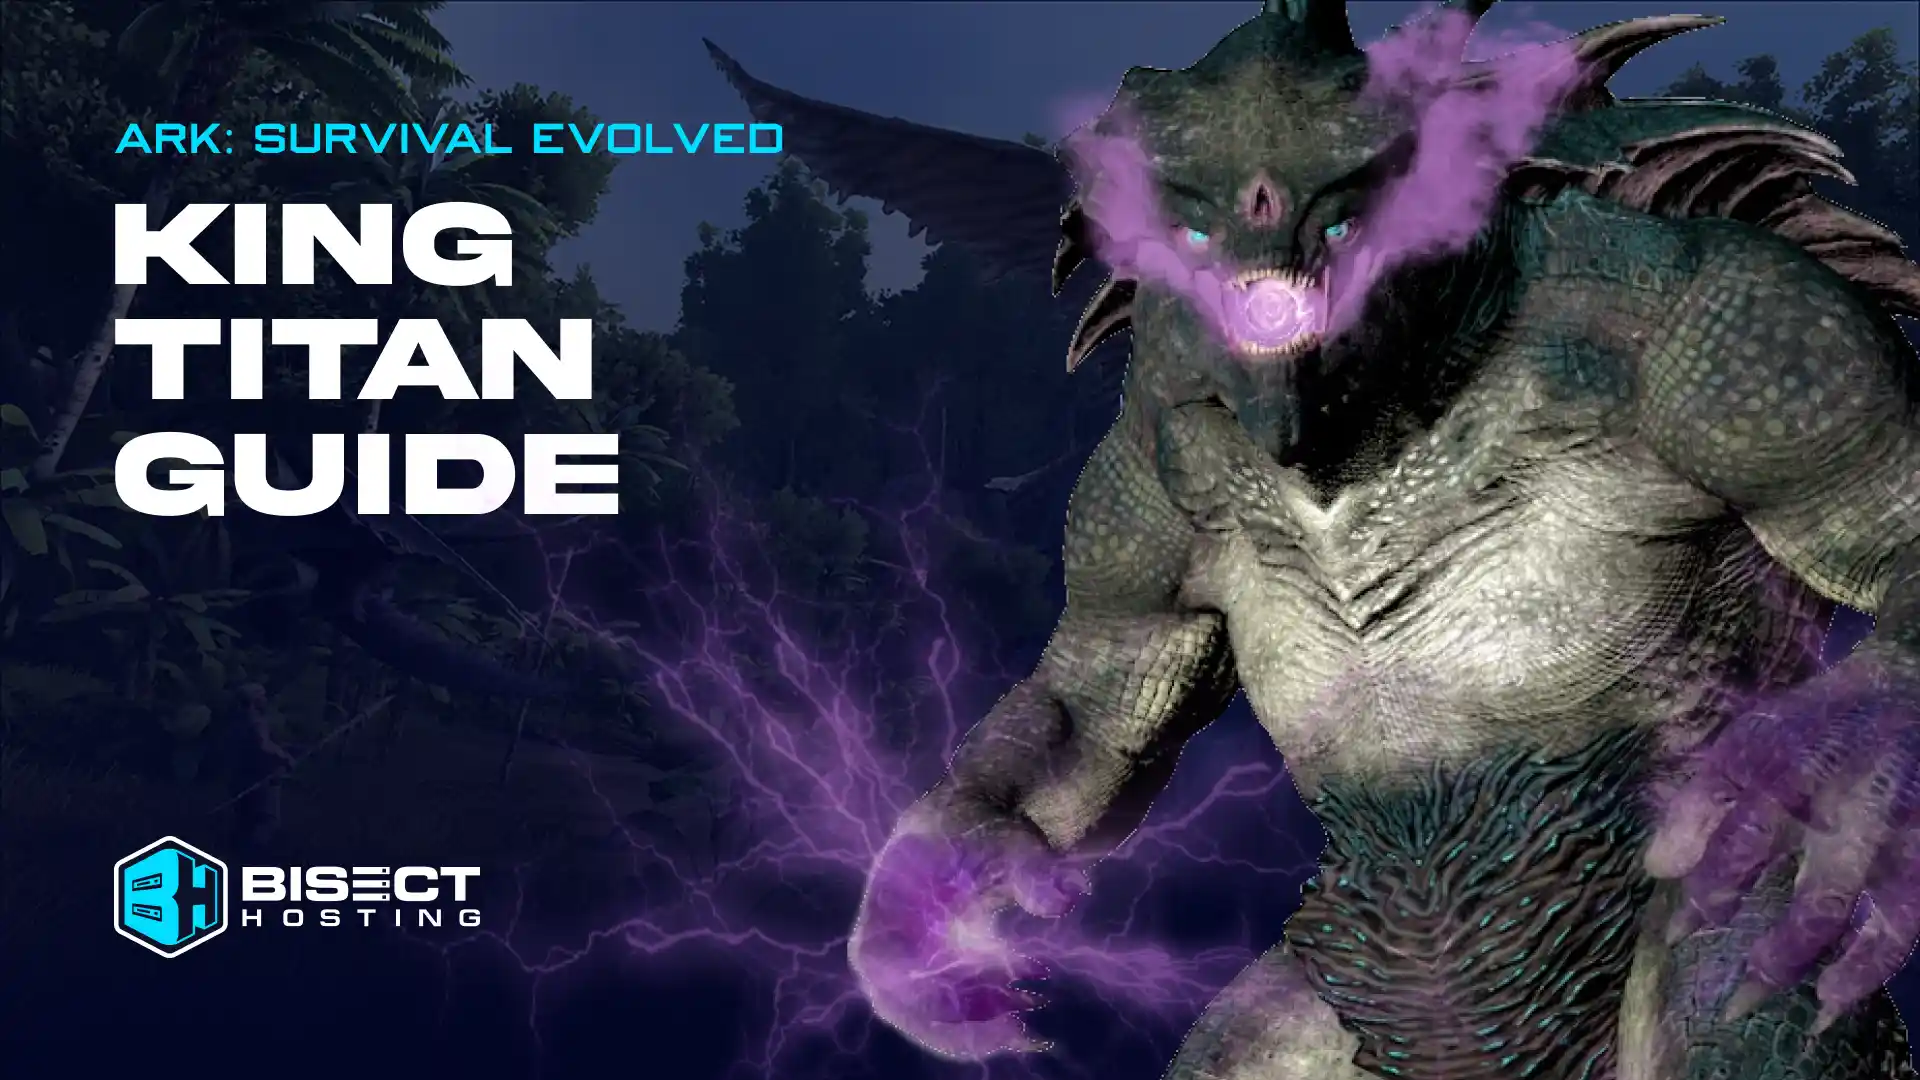 ARK: Survival Evolved King Titan Guide: Location, Summon Requirements, Loot, & More